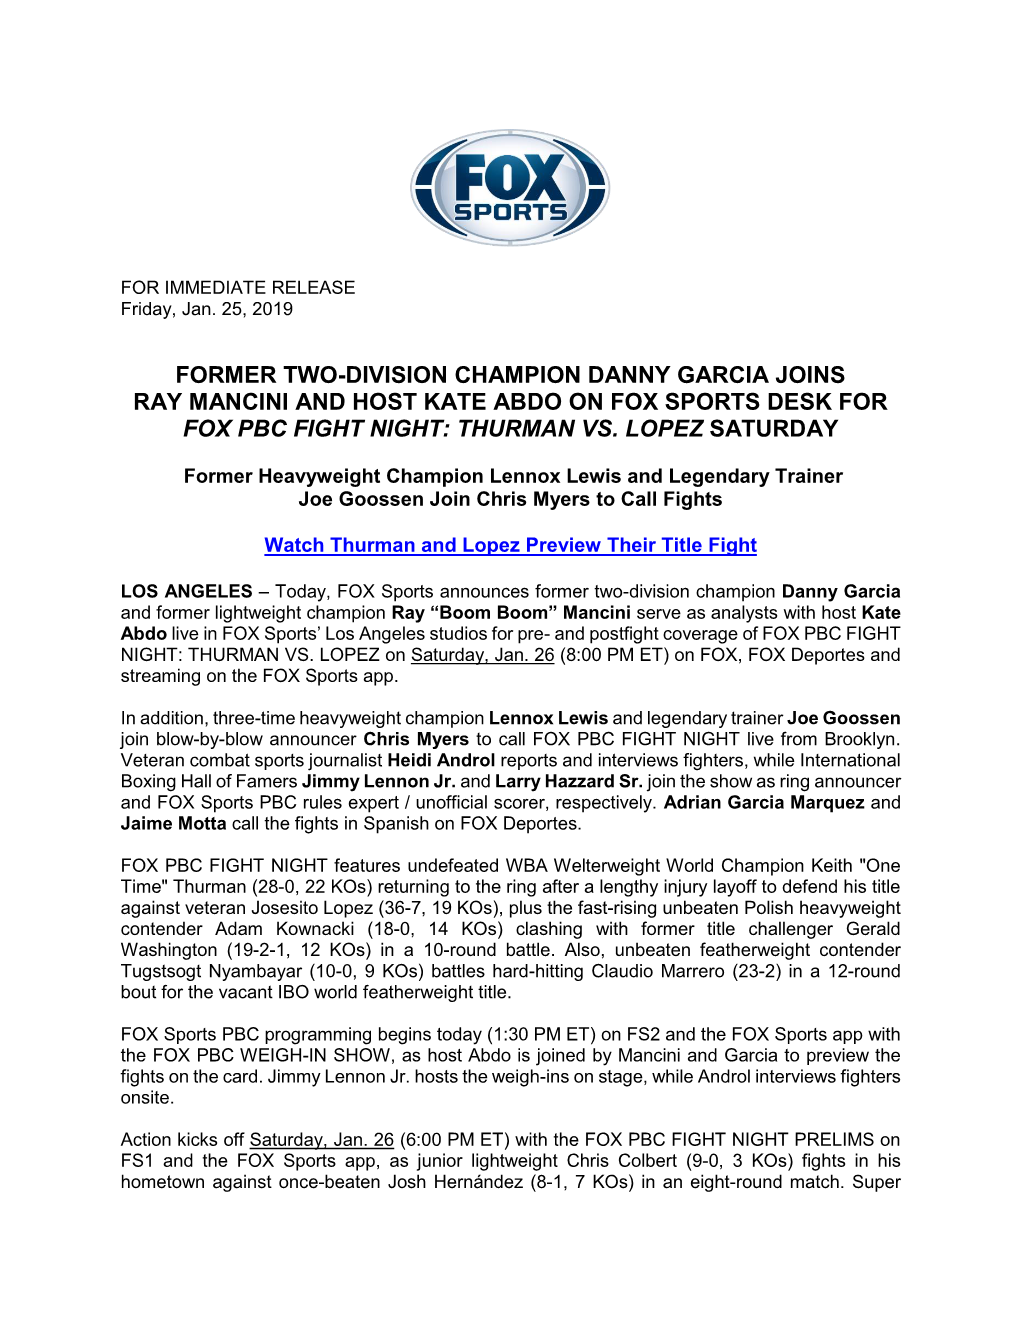 Former Two-Division Champion Danny Garcia Joins Ray Mancini and Host Kate Abdo on Fox Sports Desk for Fox Pbc Fight Night: Thurman Vs